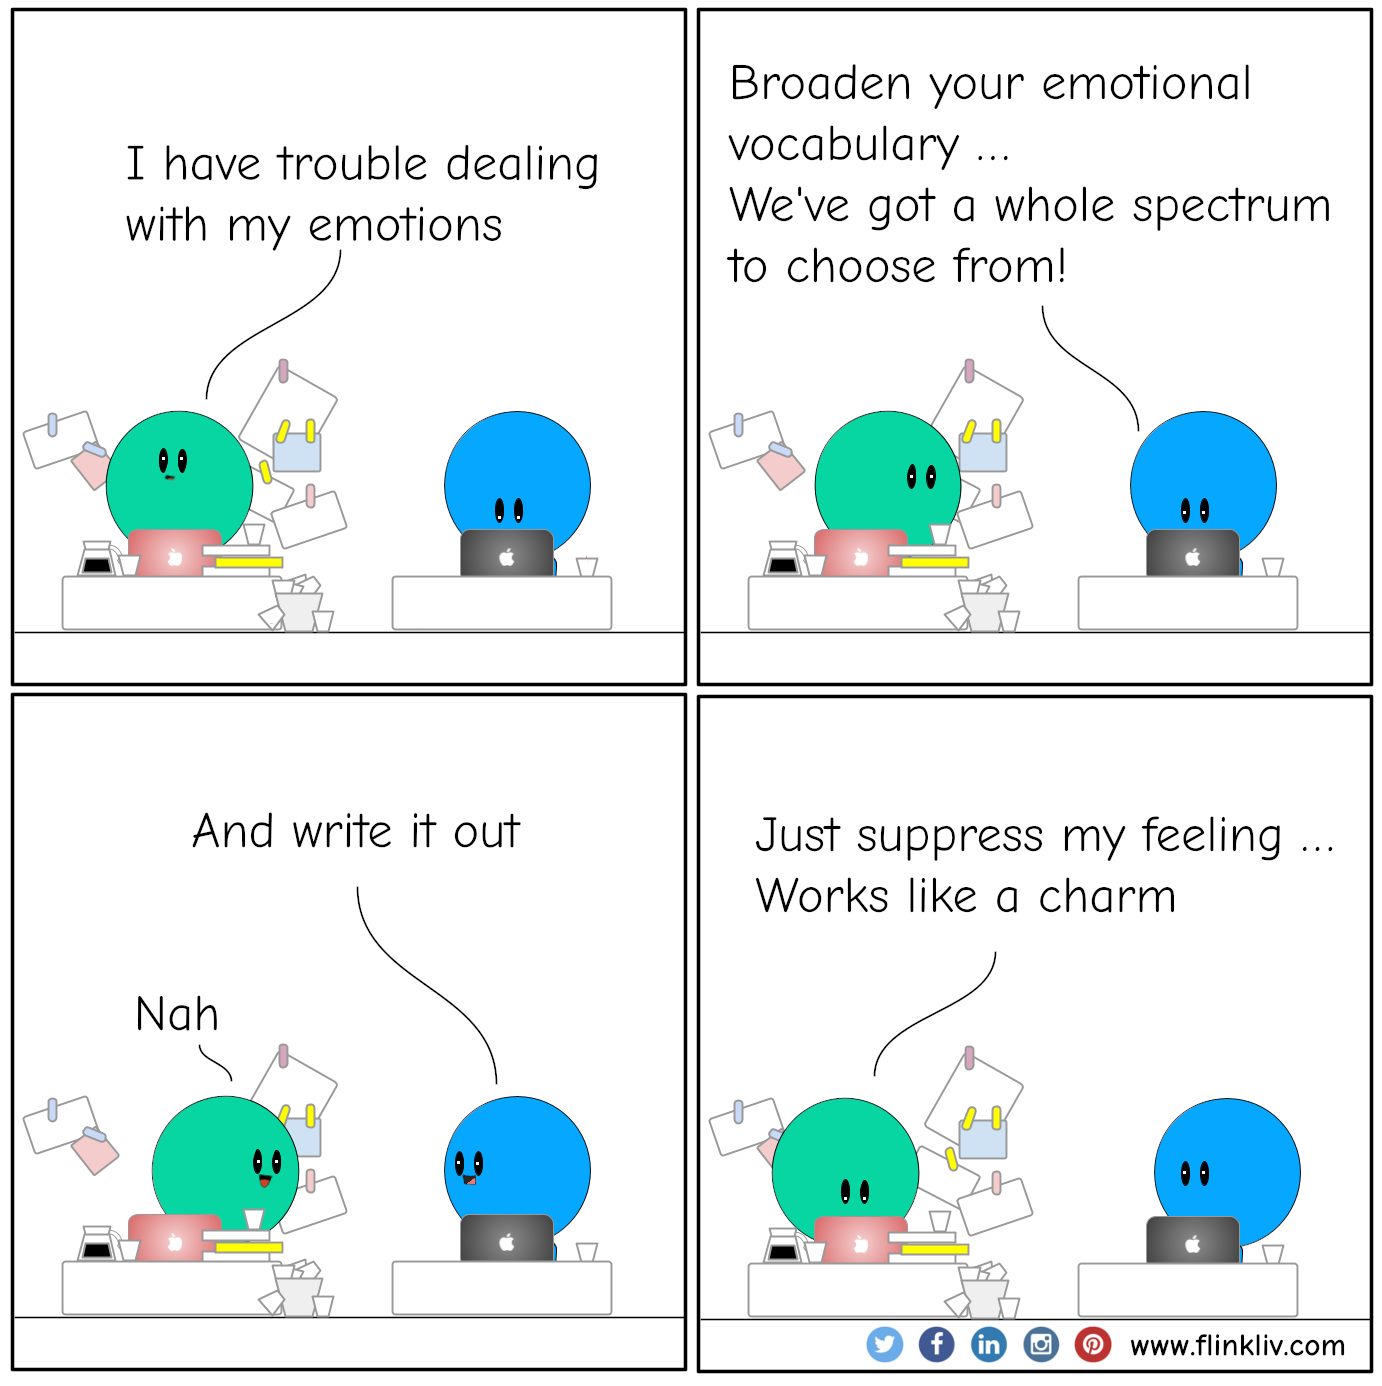 A conversation between A and B about how to understand our emotions
				A:I have trouble dealing with my emotions.
				B: Broaden your emotional vocabulary,
				B: We've got a whole spectrum of emotions to choose from!
				B: And write it out.
				B: Cause that's where the real magic happens.
              